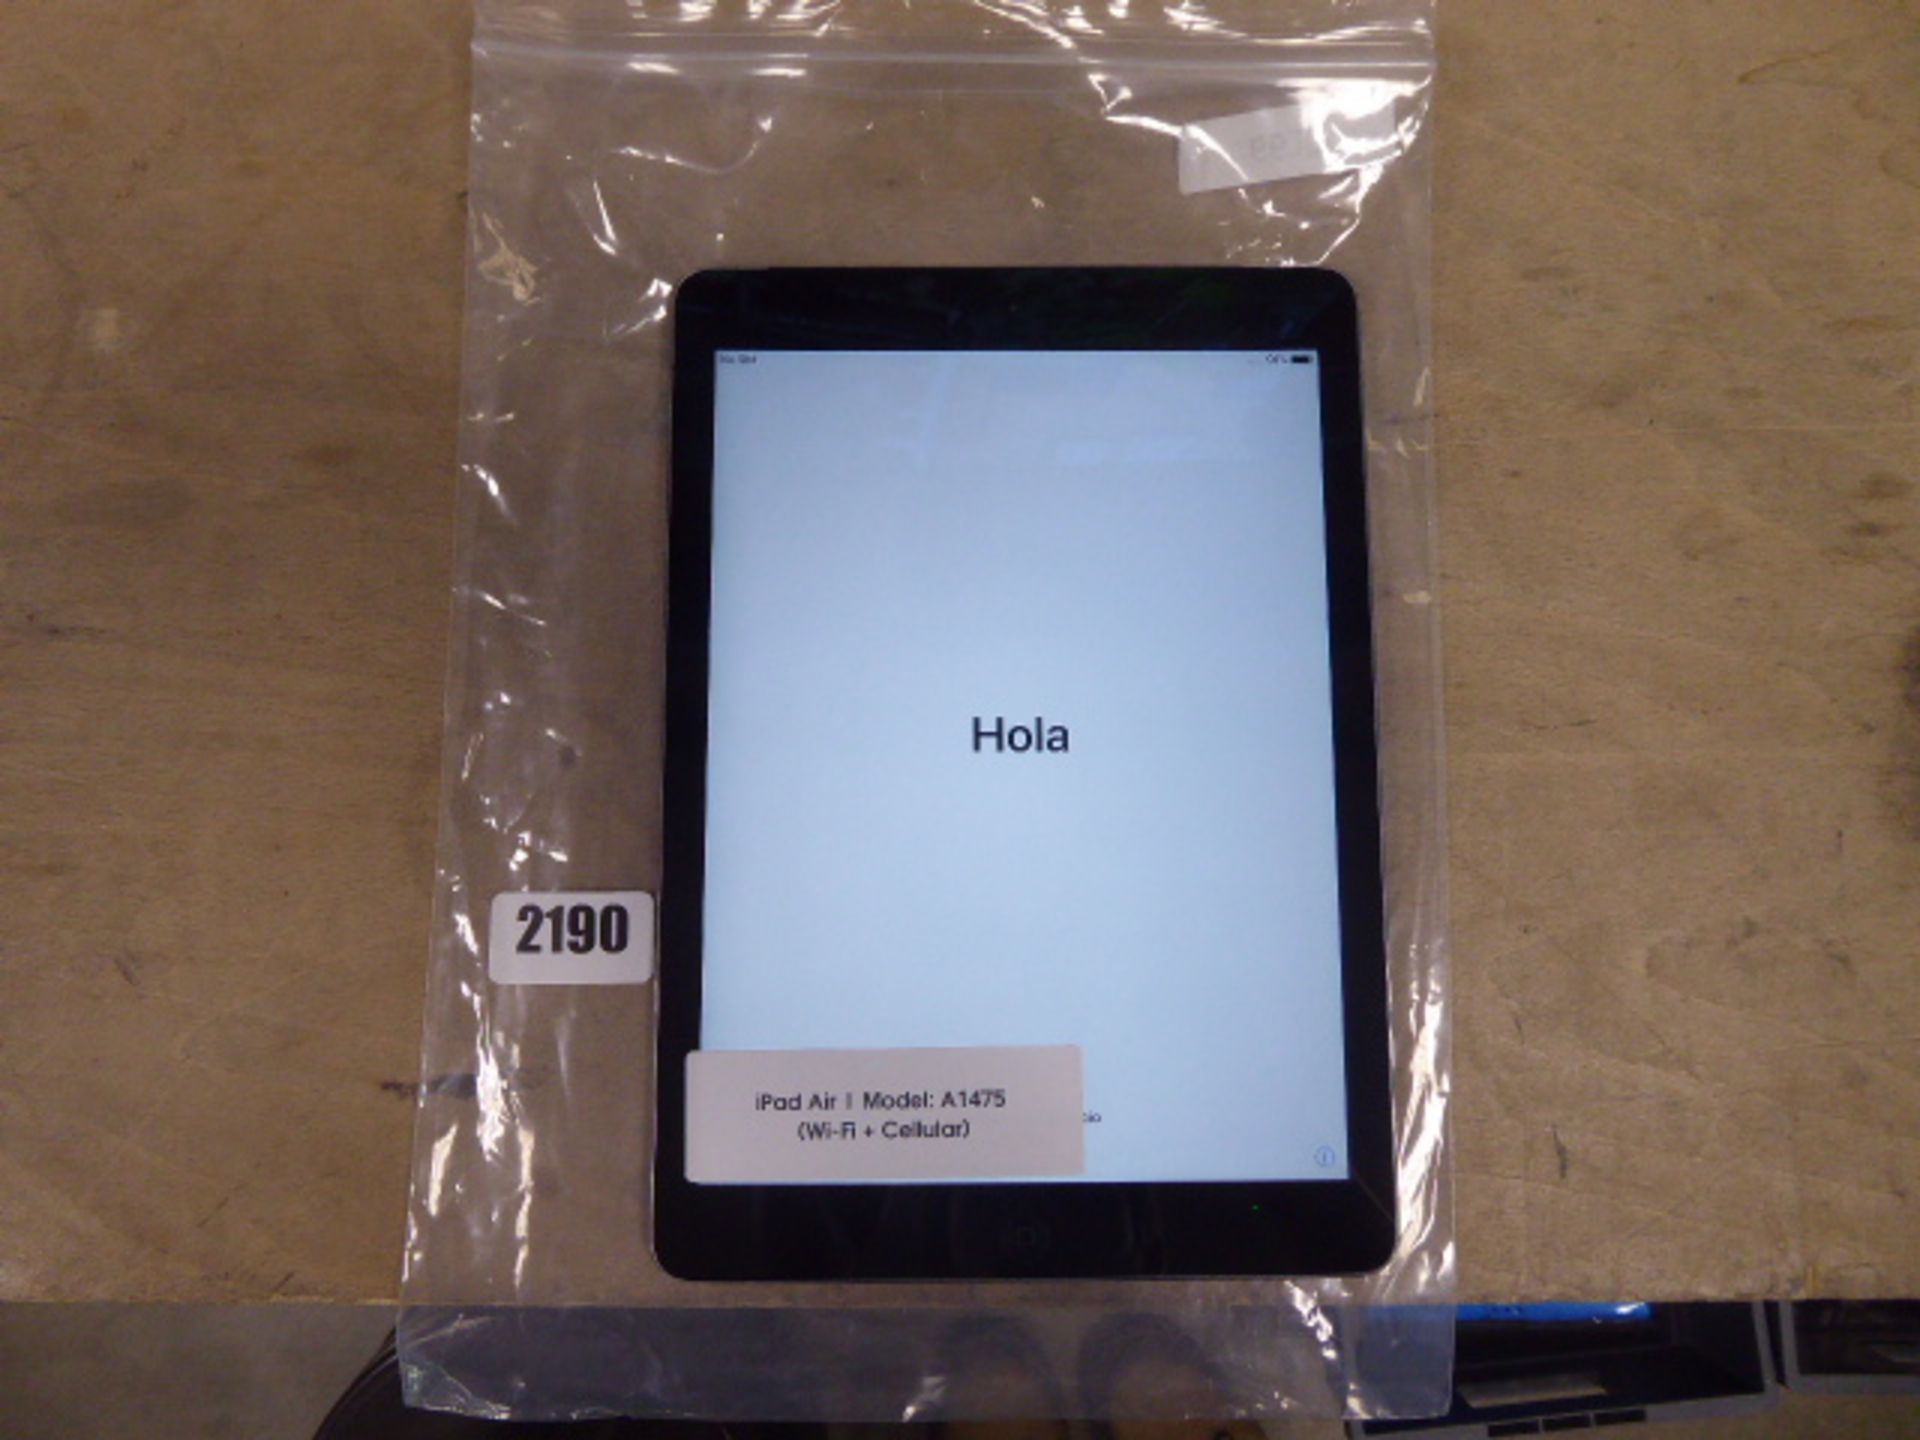 Apple iPad Air model A1475 wifi and cellular model (possibly locked to iCloud, no accessories)